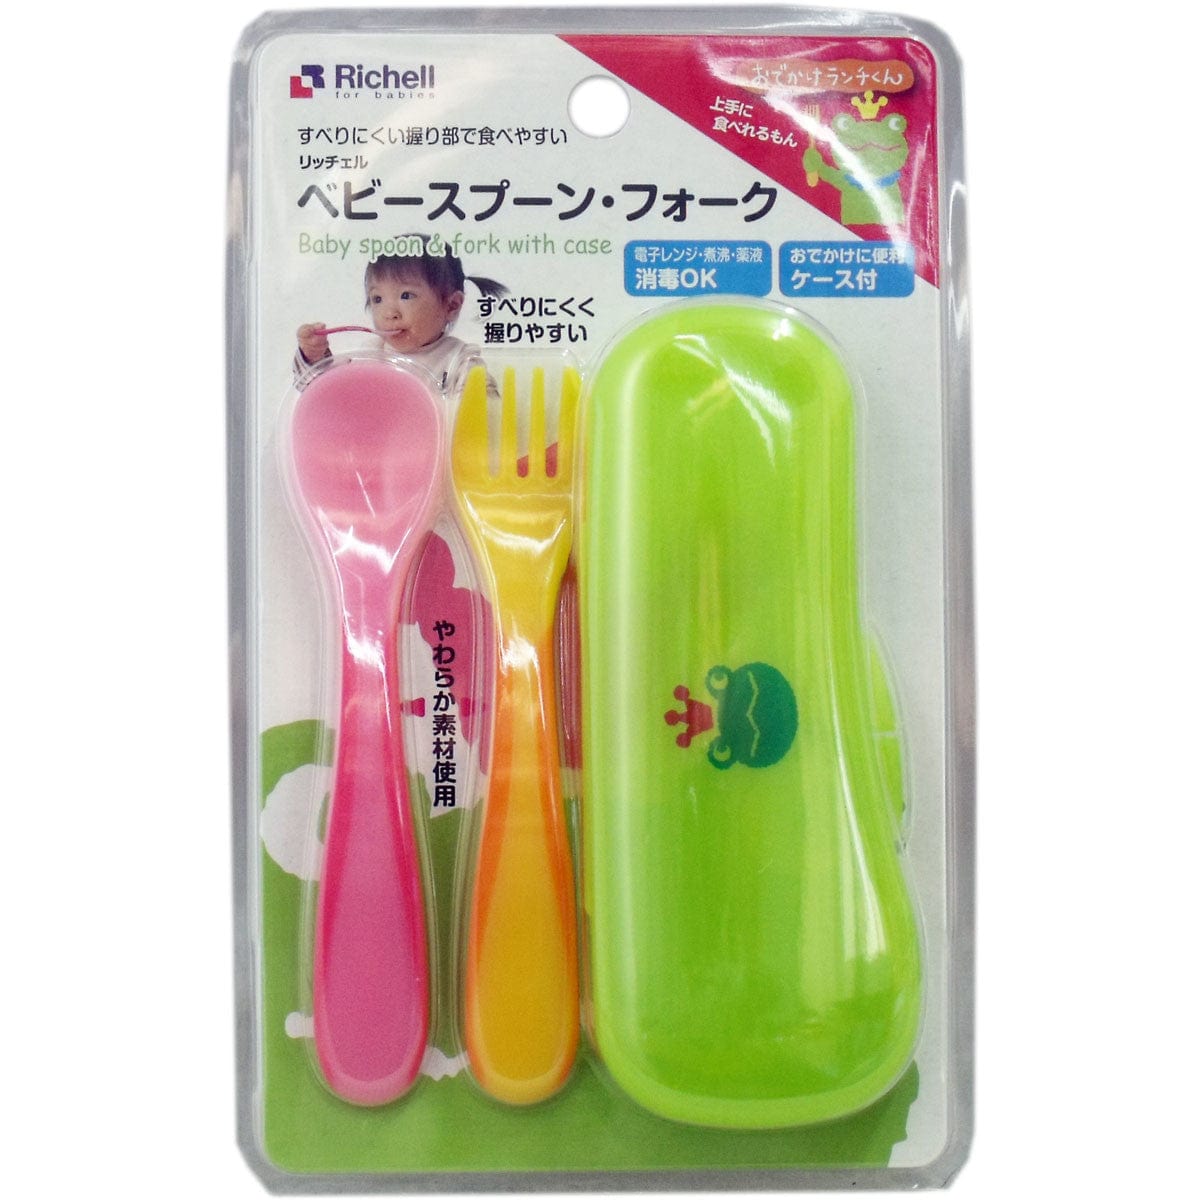 Richell 'Odekake Lunch Kun' Easy to Cut Baby Food Scissors with Case